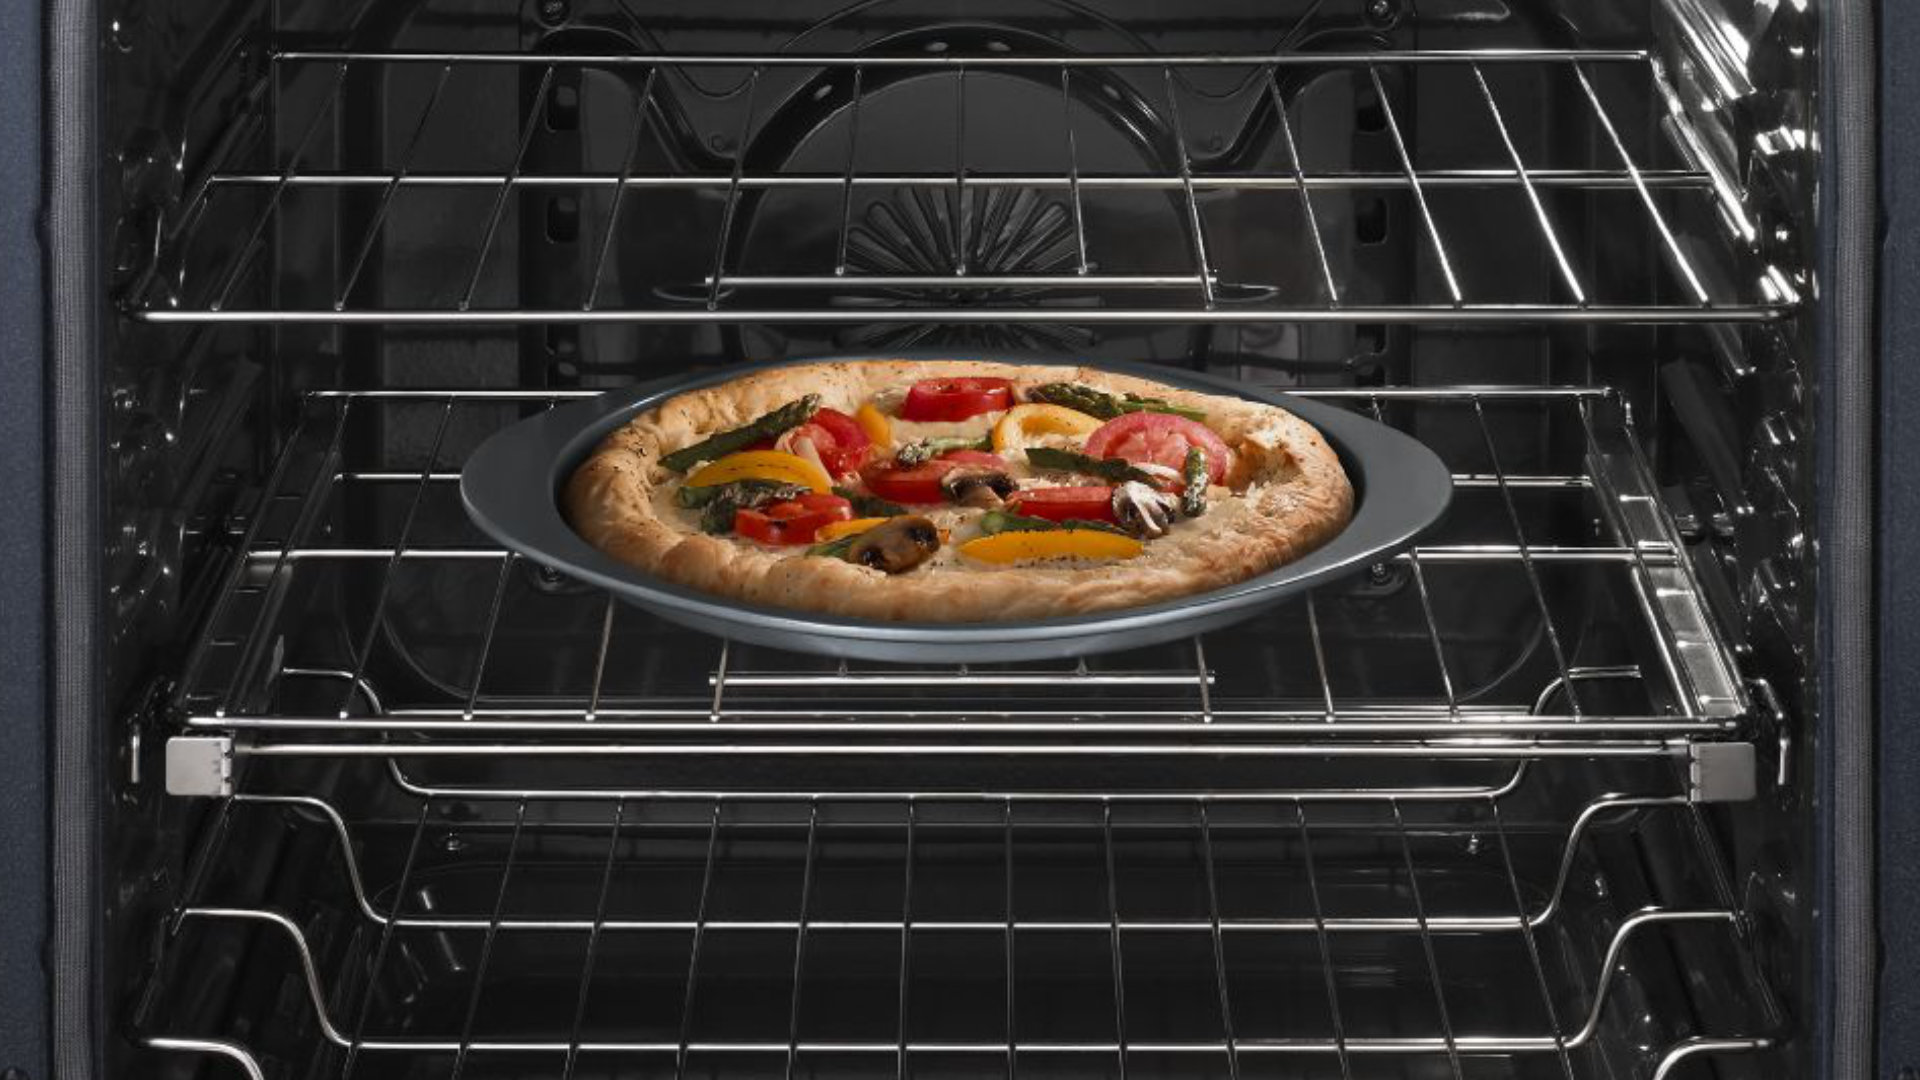 Featured image for “Whirlpool Oven Not Heating? Here’s How To Fix It”